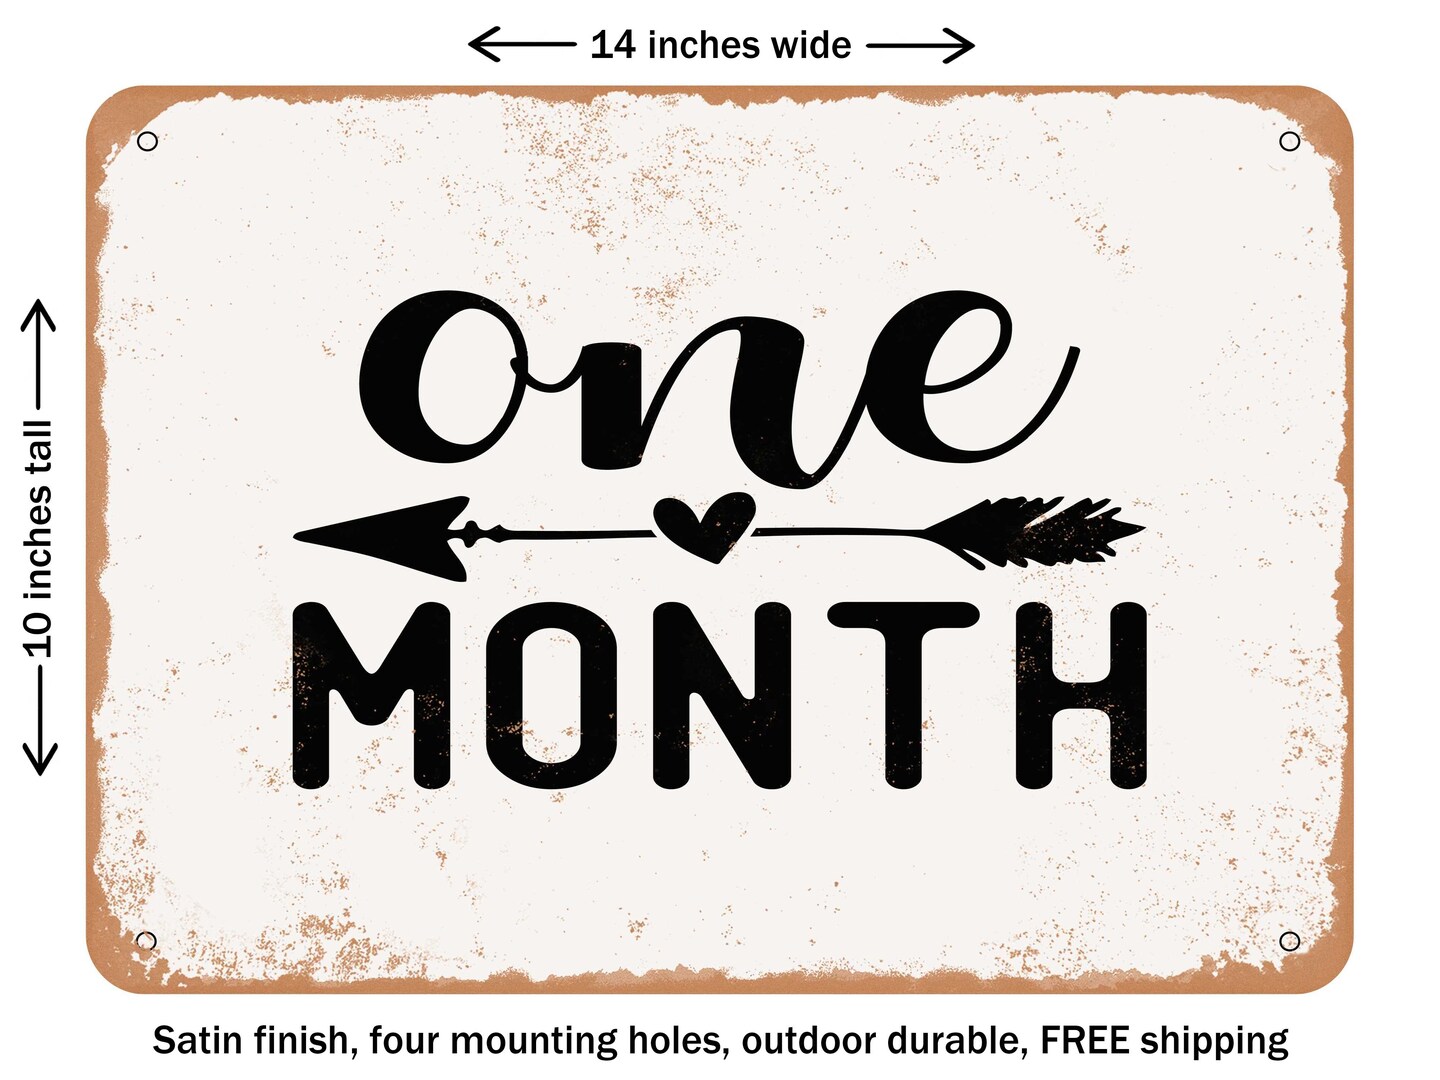 DECORATIVE METAL SIGN - One Month - Vintage Rusty Look